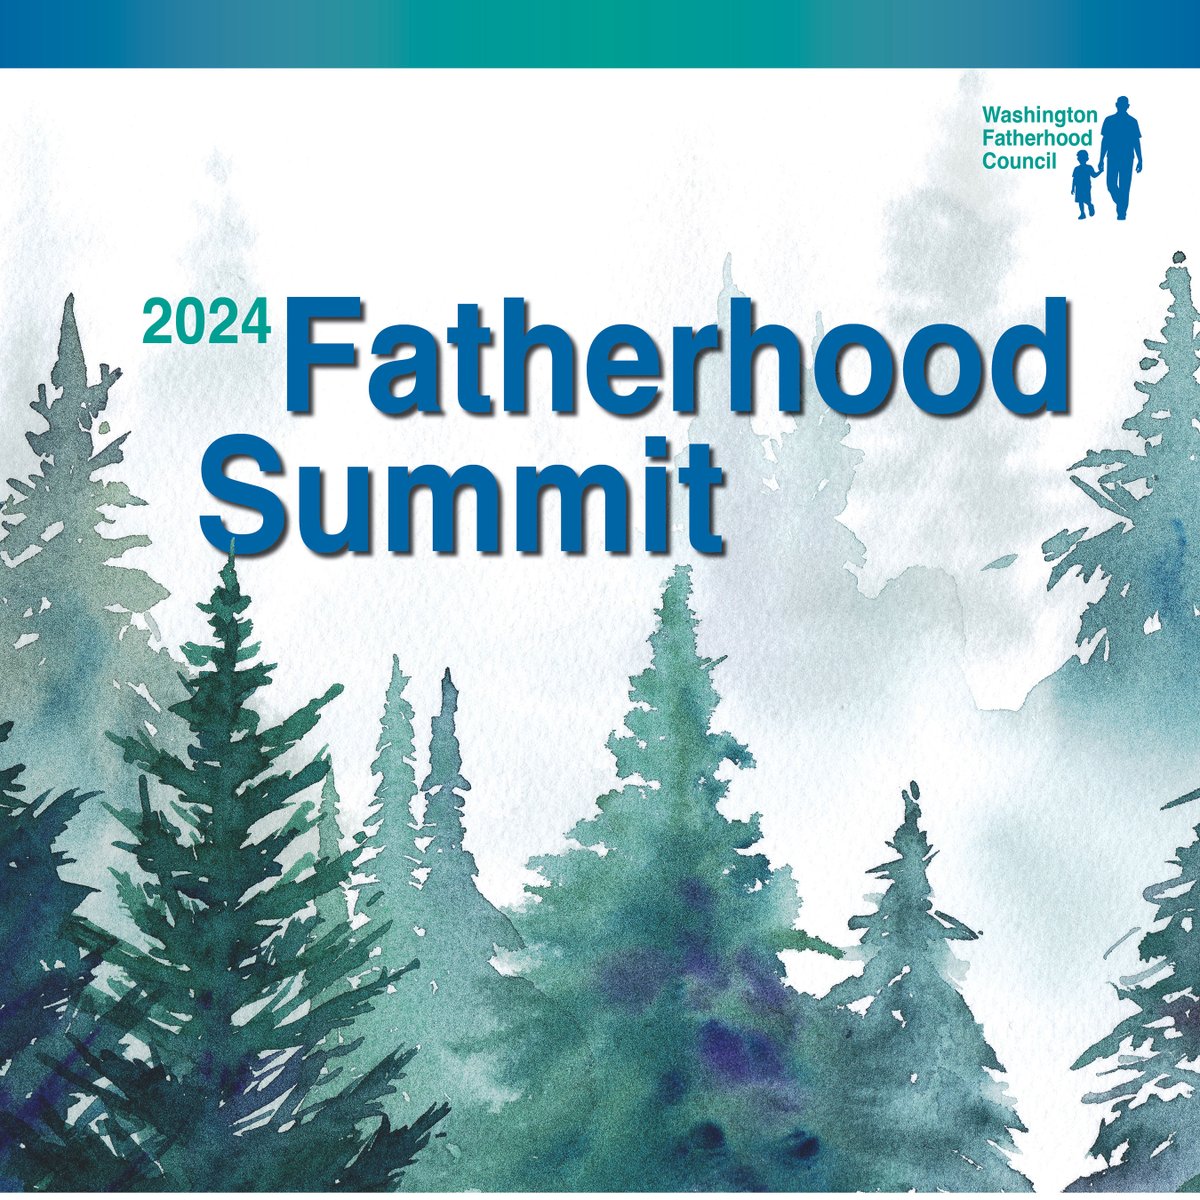 Registration is now open for the 2024 Fatherhood Summit! Hosted by the Washington Fatherhood Council, this free event takes place 7:30 a.m. - 4:40 p.m. Friday, June 7 at the Greater Tacoma Convention Center. Learn more and register below ⬇️ wafatherhoodcouncil.org/events/2024-fa…